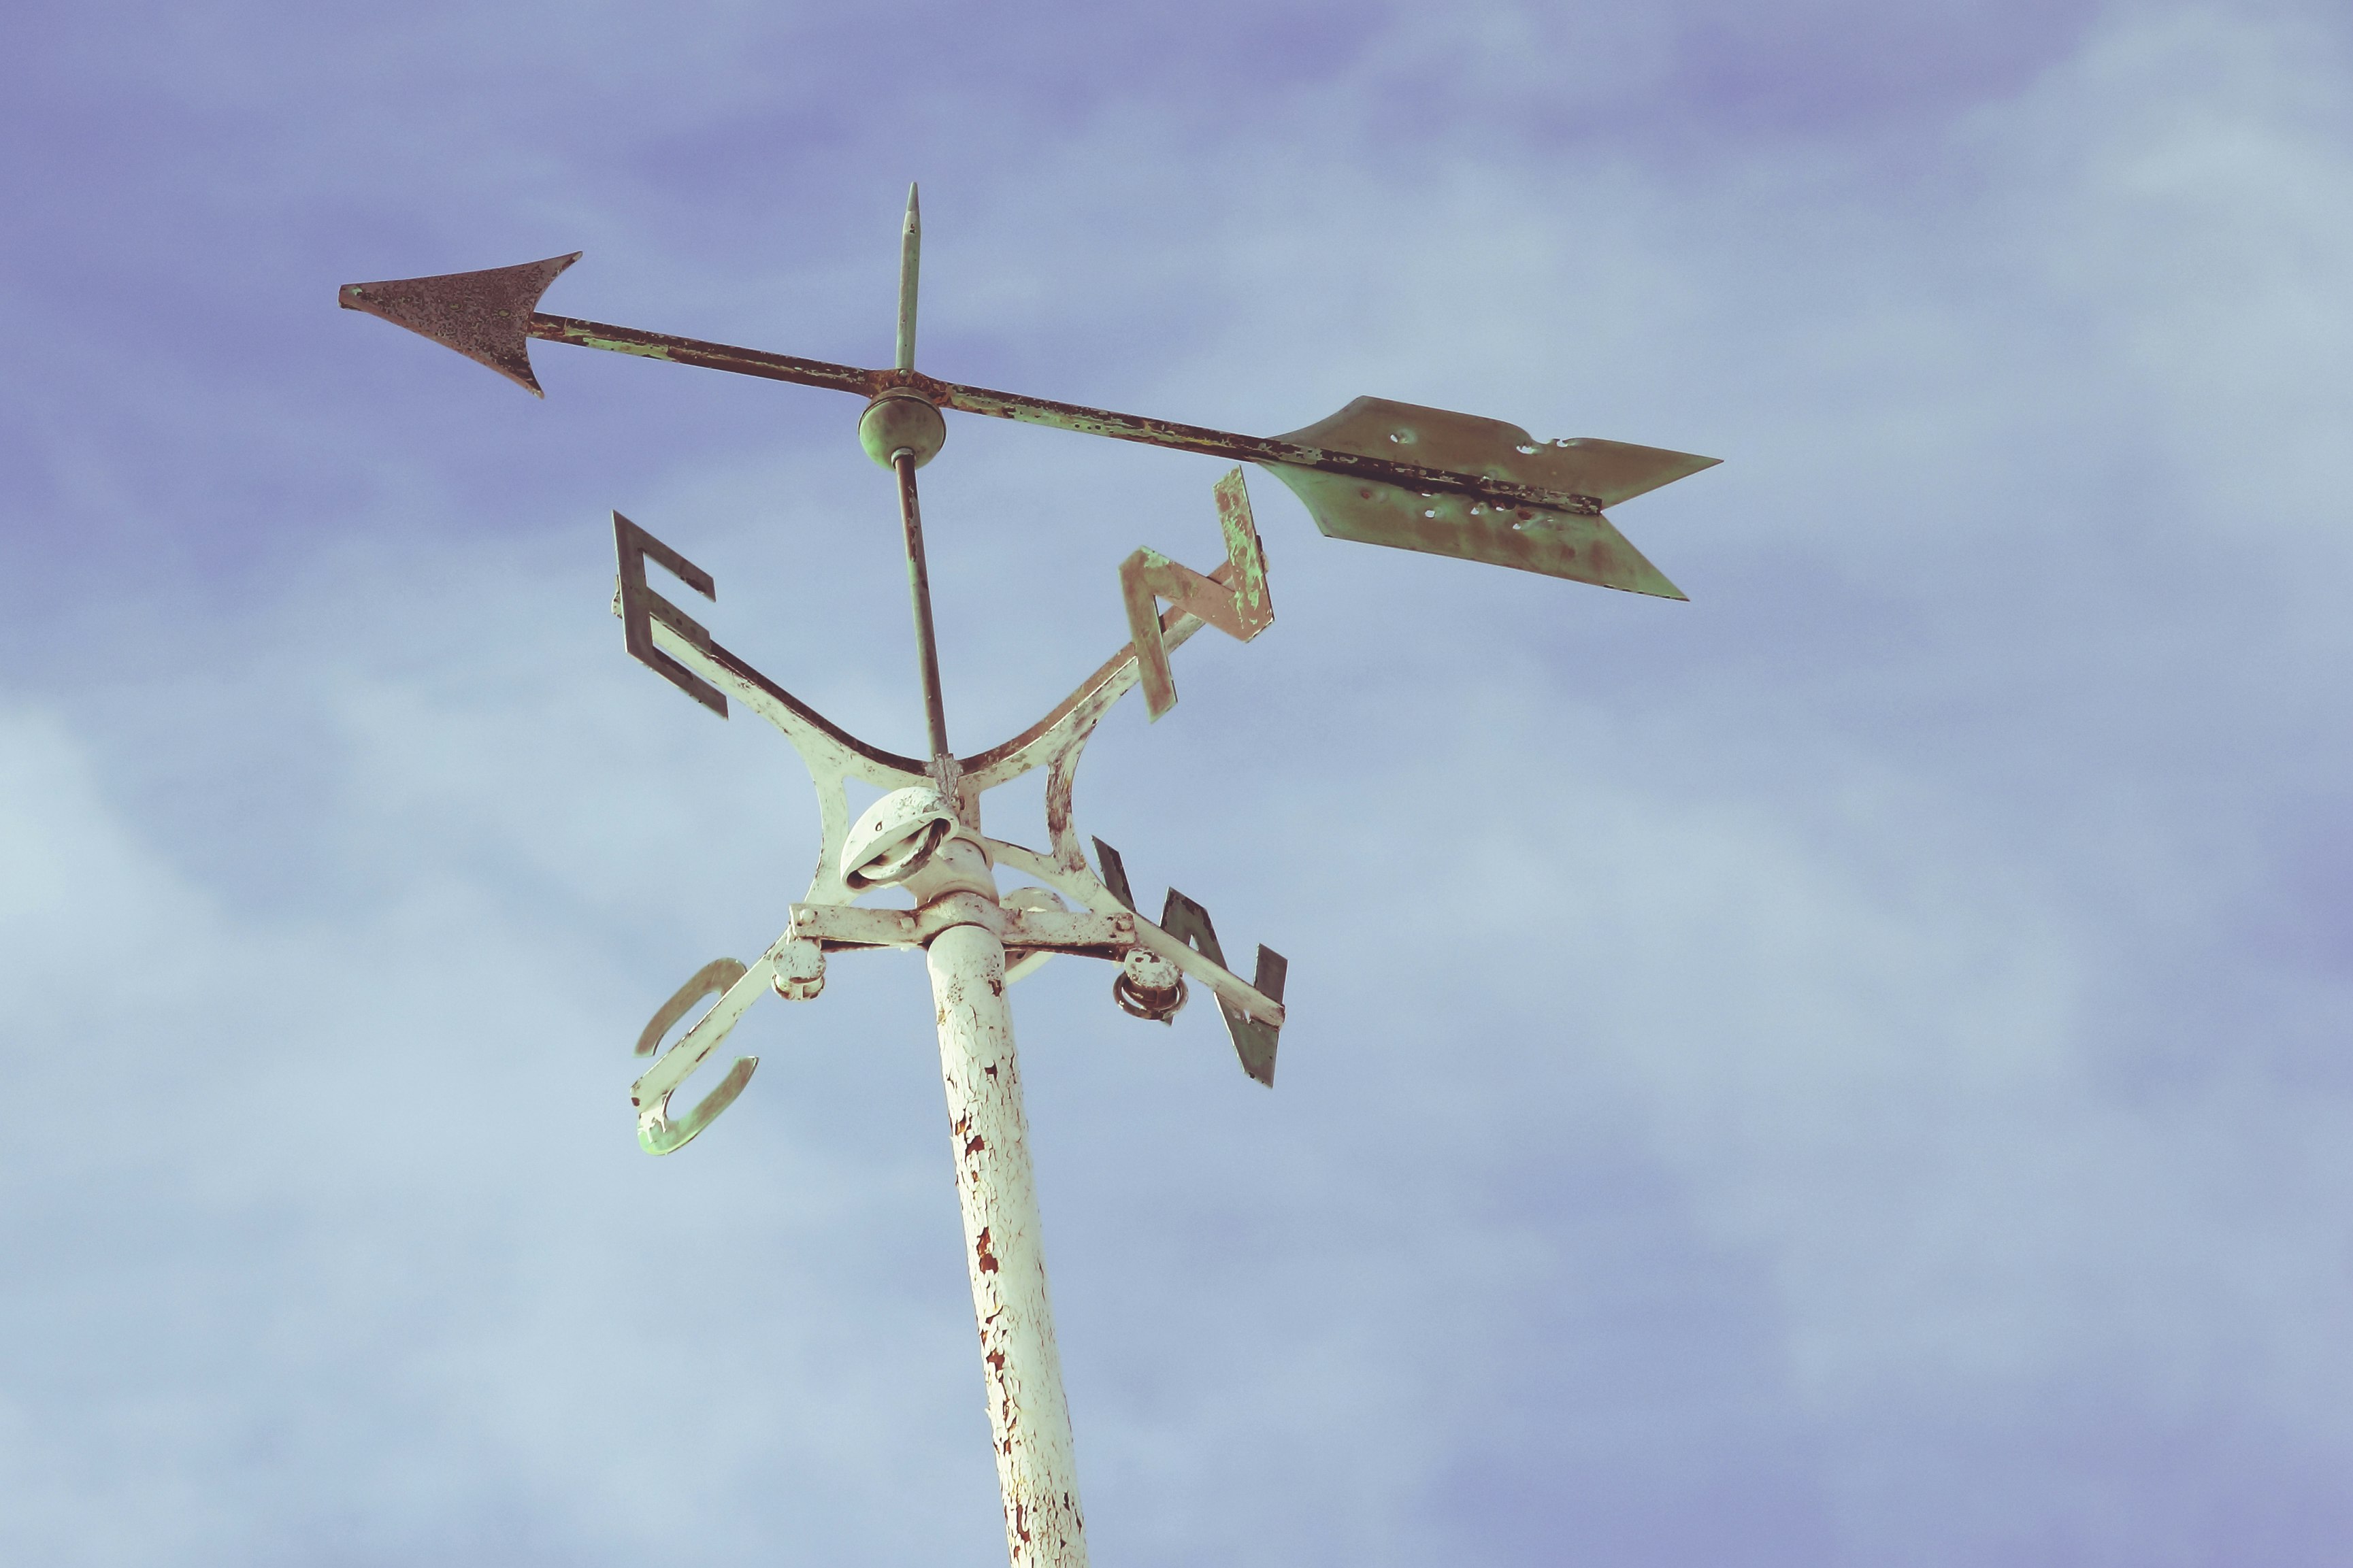 Weather vane atop the former Coast Guard building in Cleveland, Ohio.